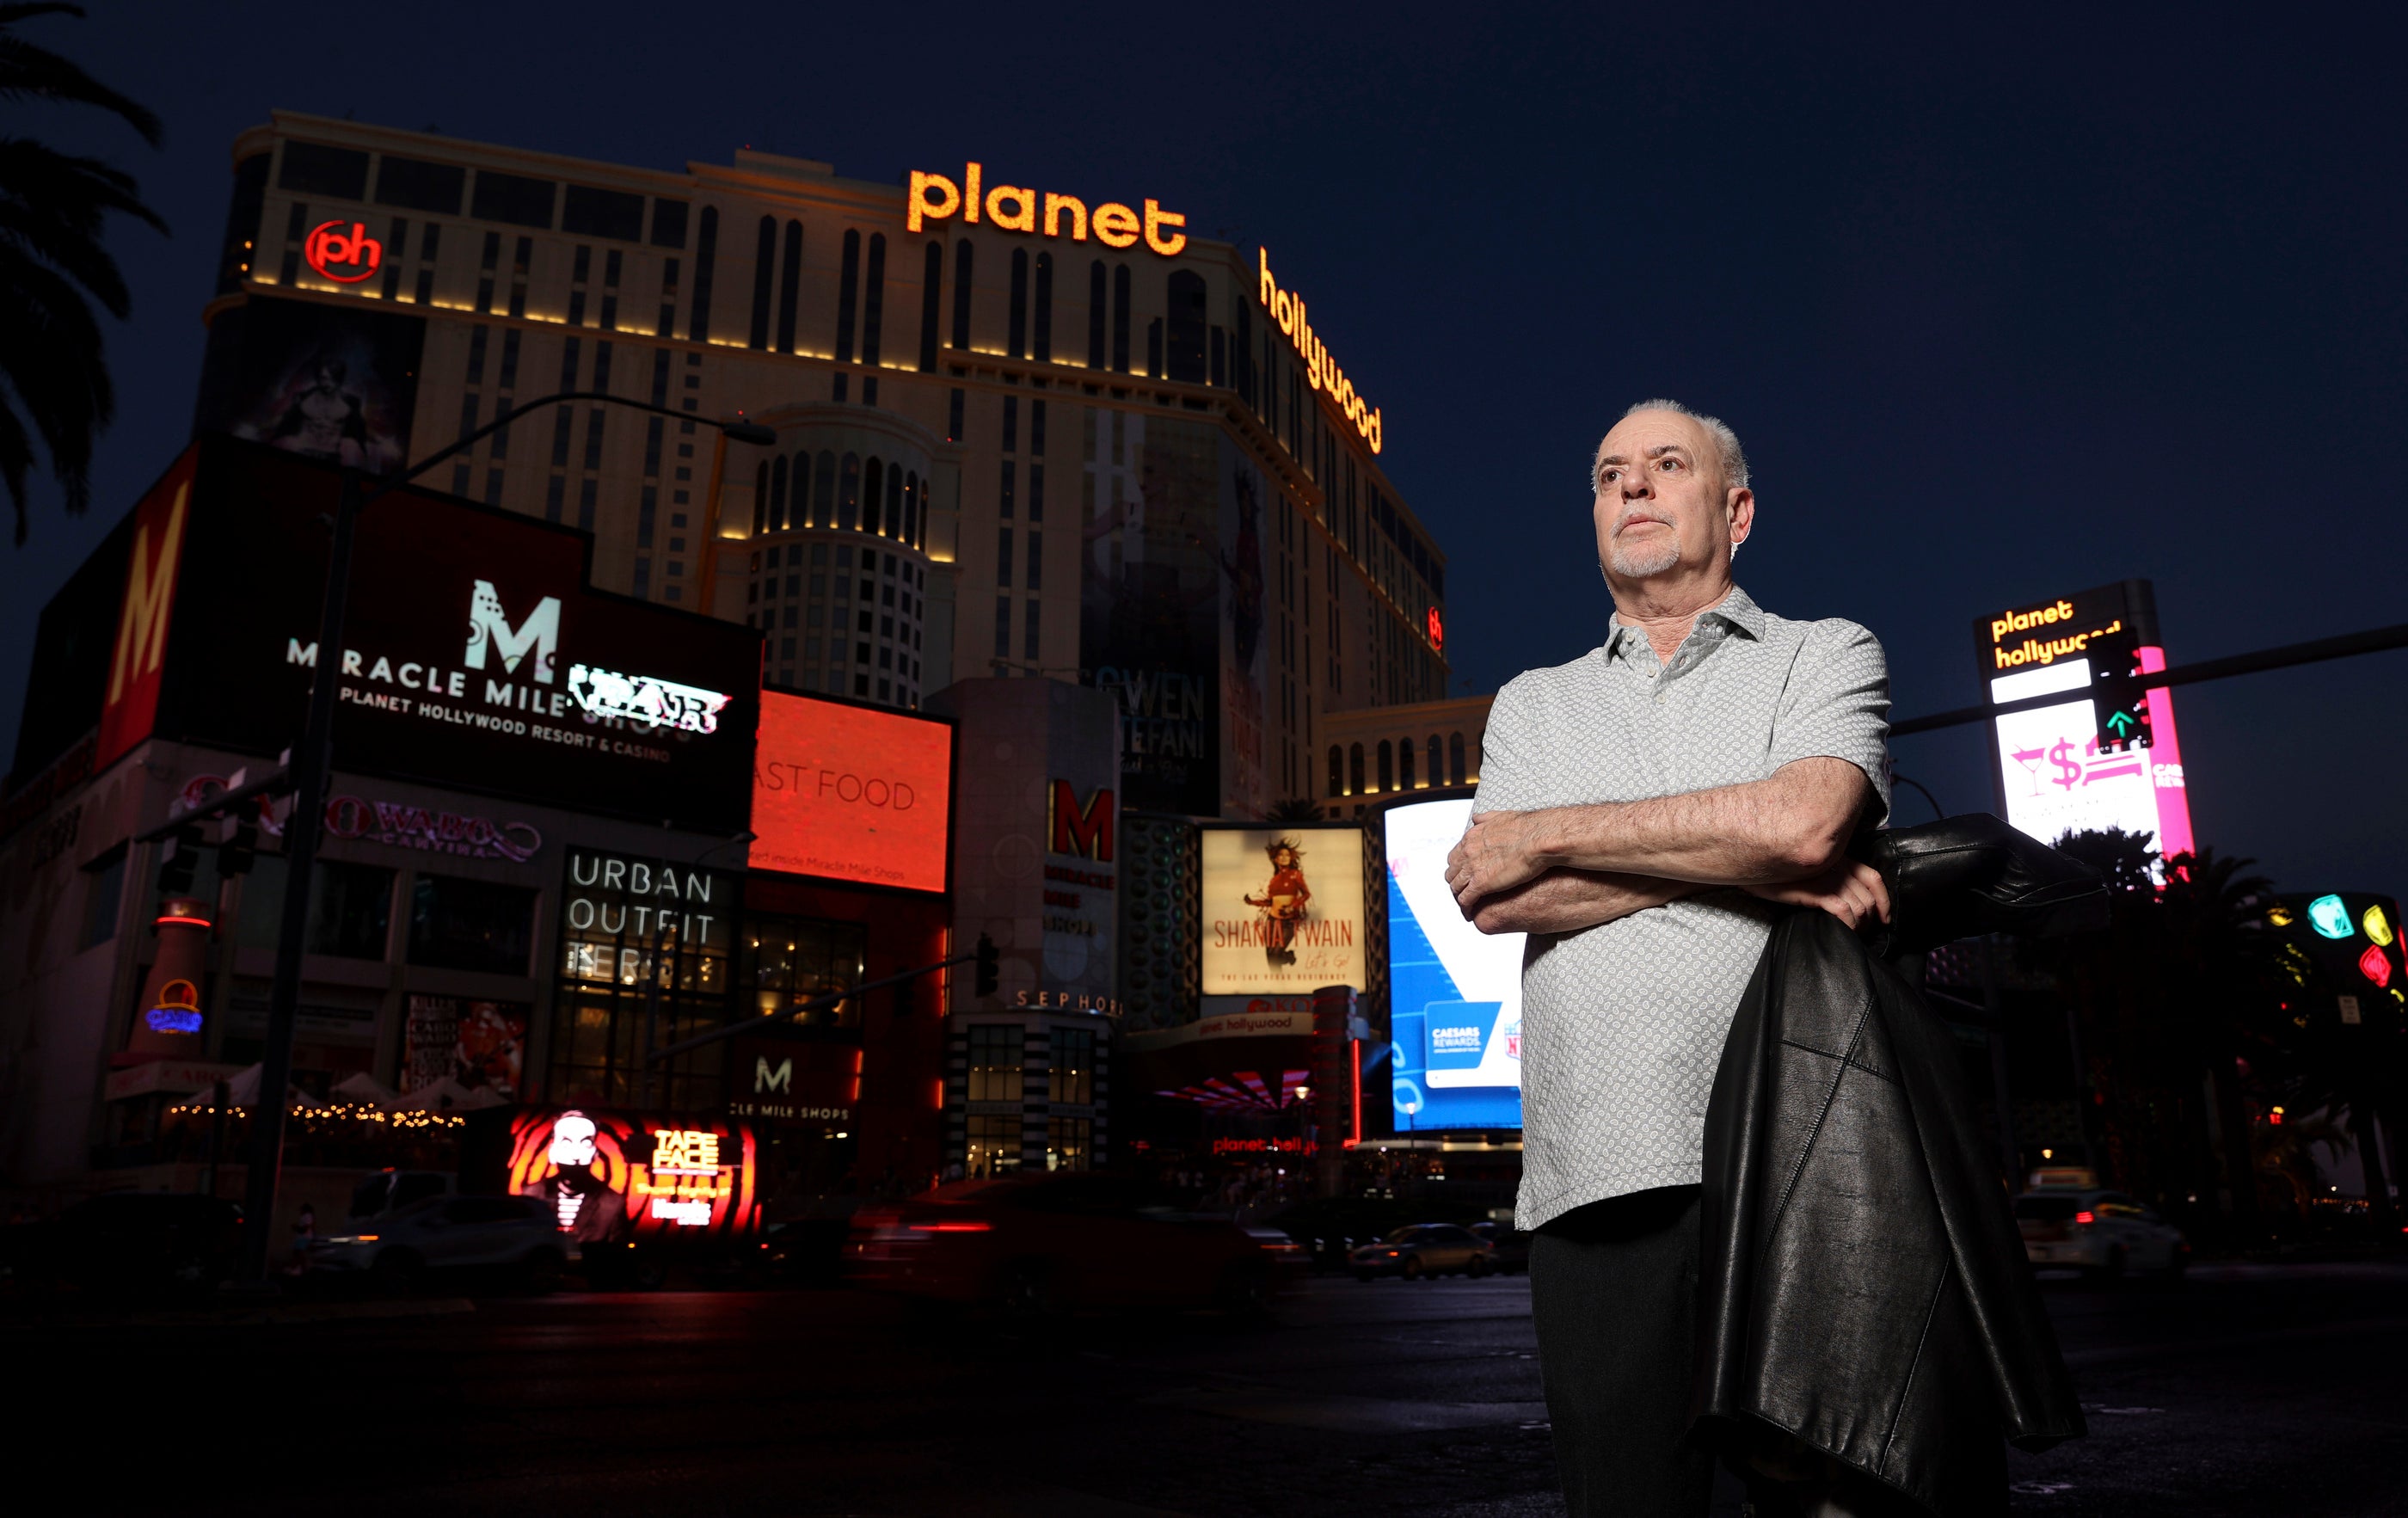 Jeff German, host of “Mobbed Up,” poses with Planet Hollywood in the background on the Las Vegas Strip